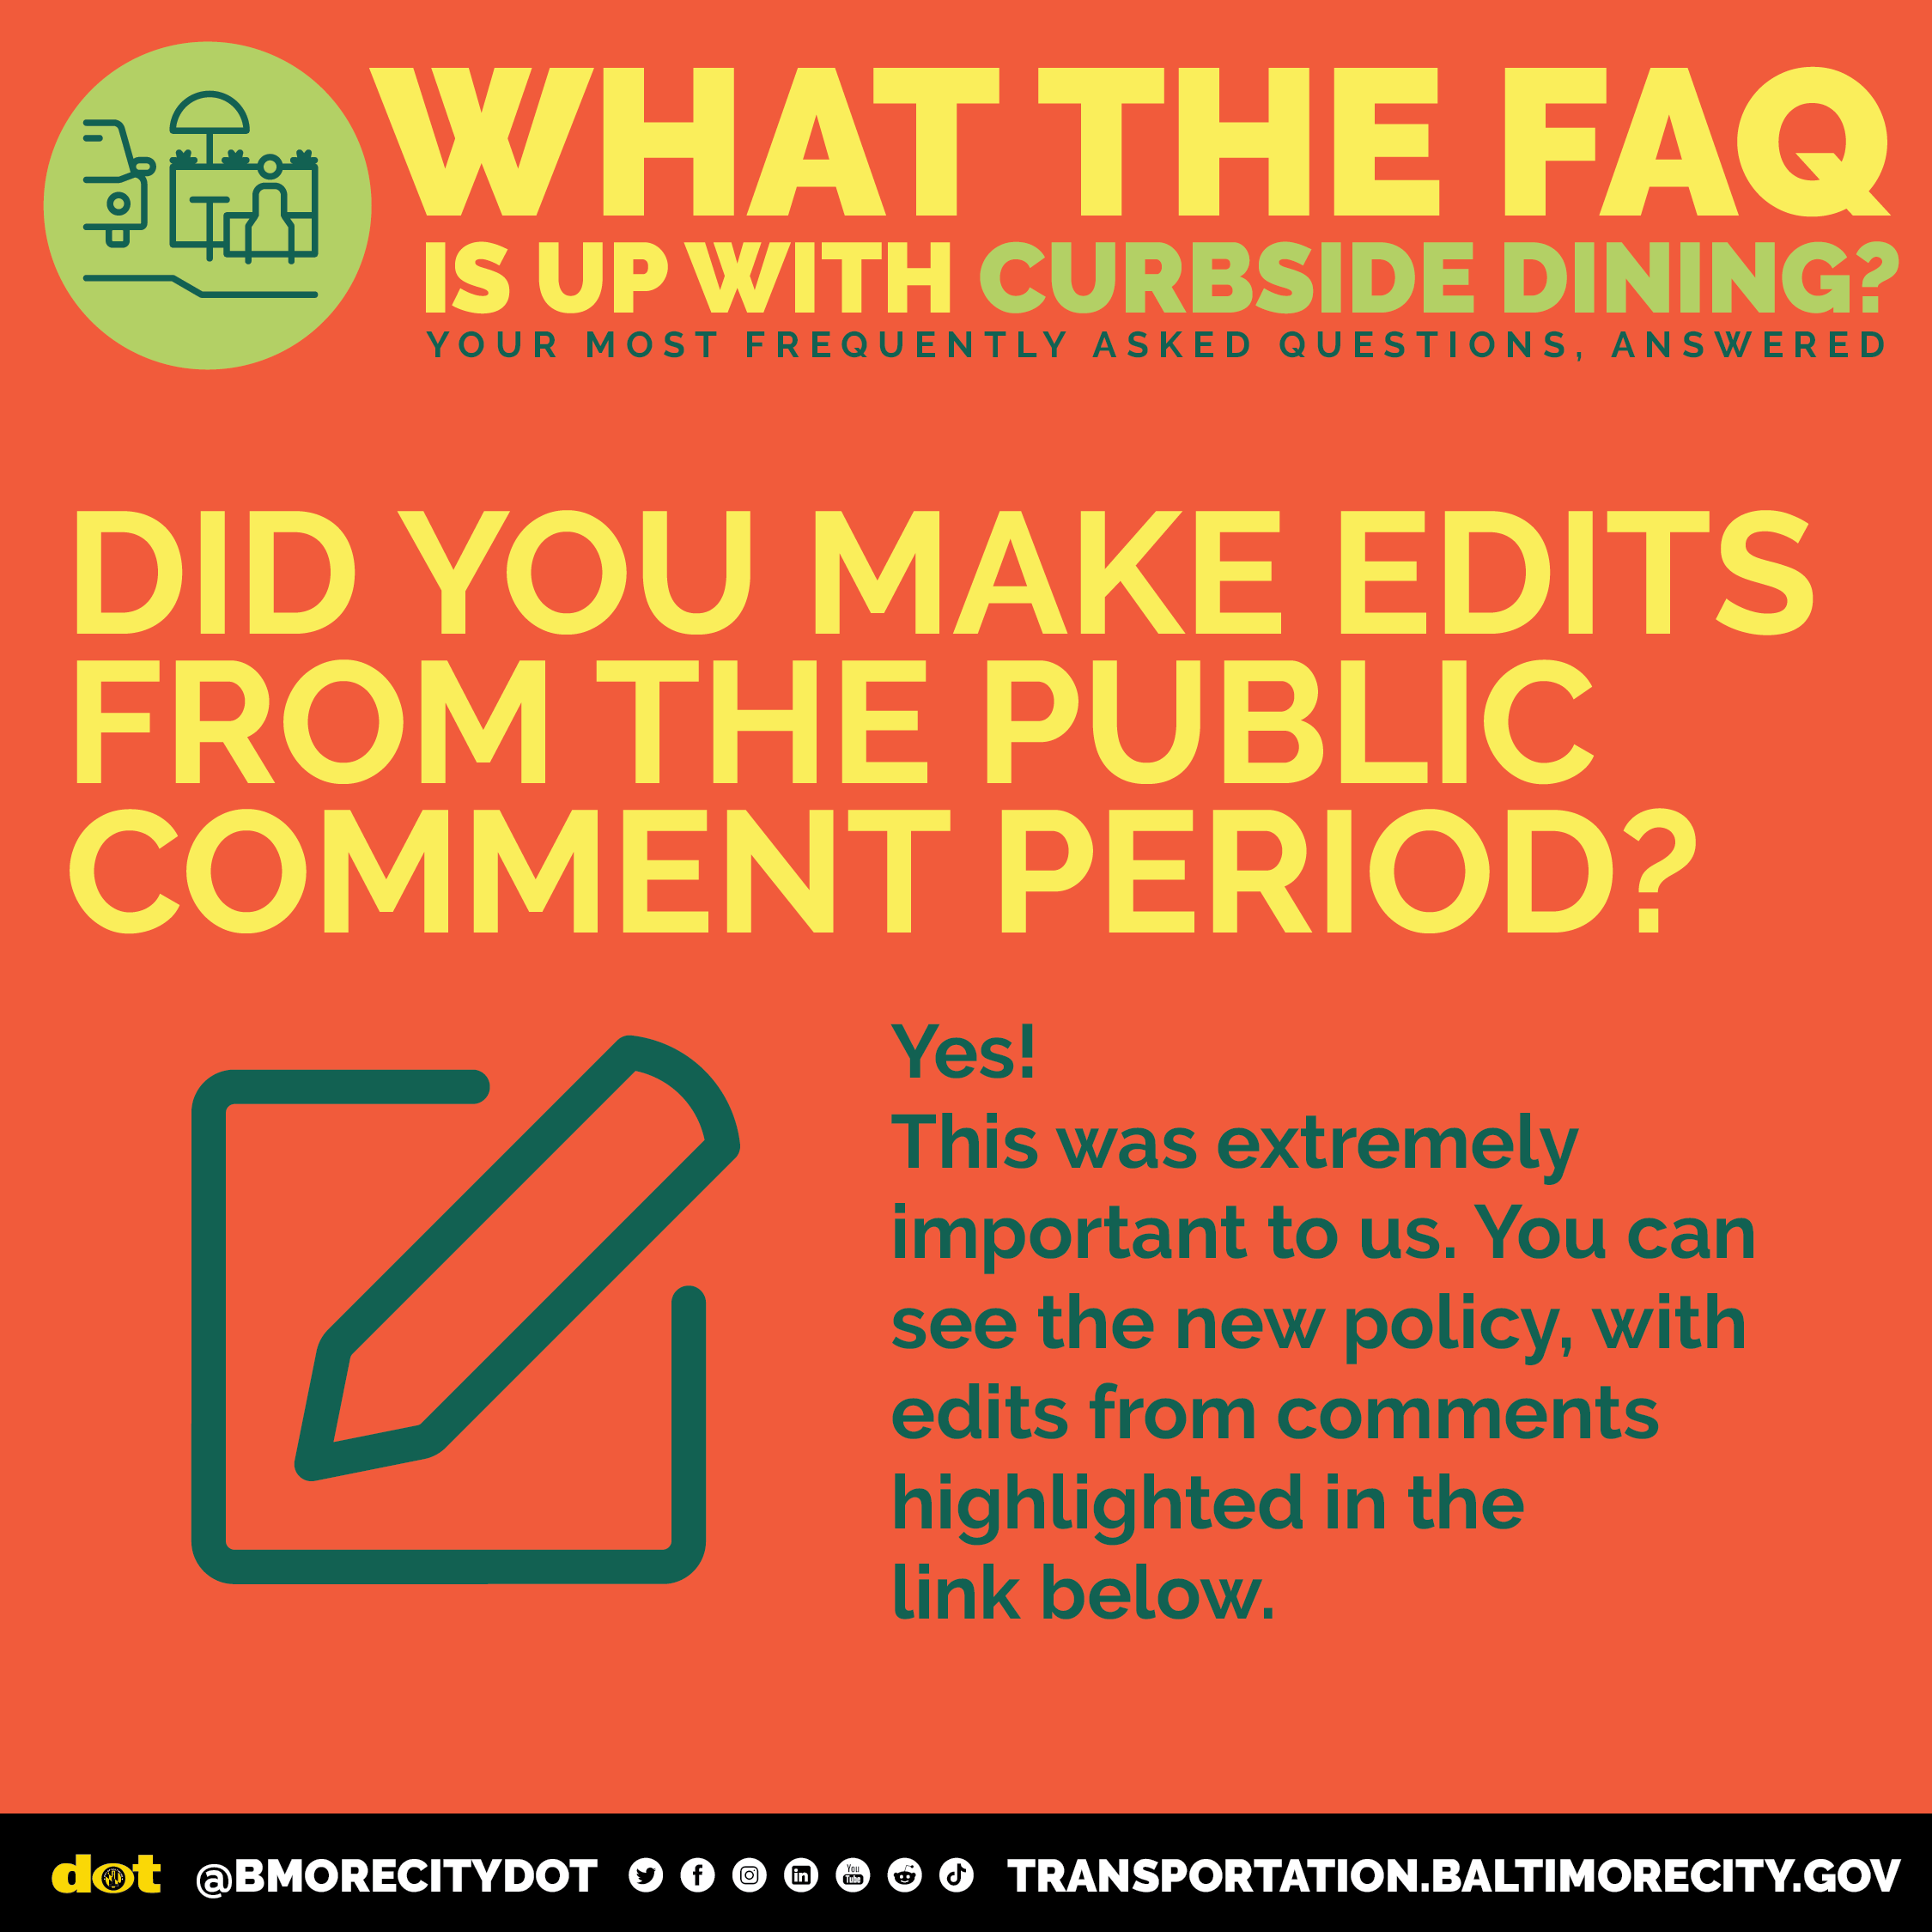 Did you make edits from the public comment period?